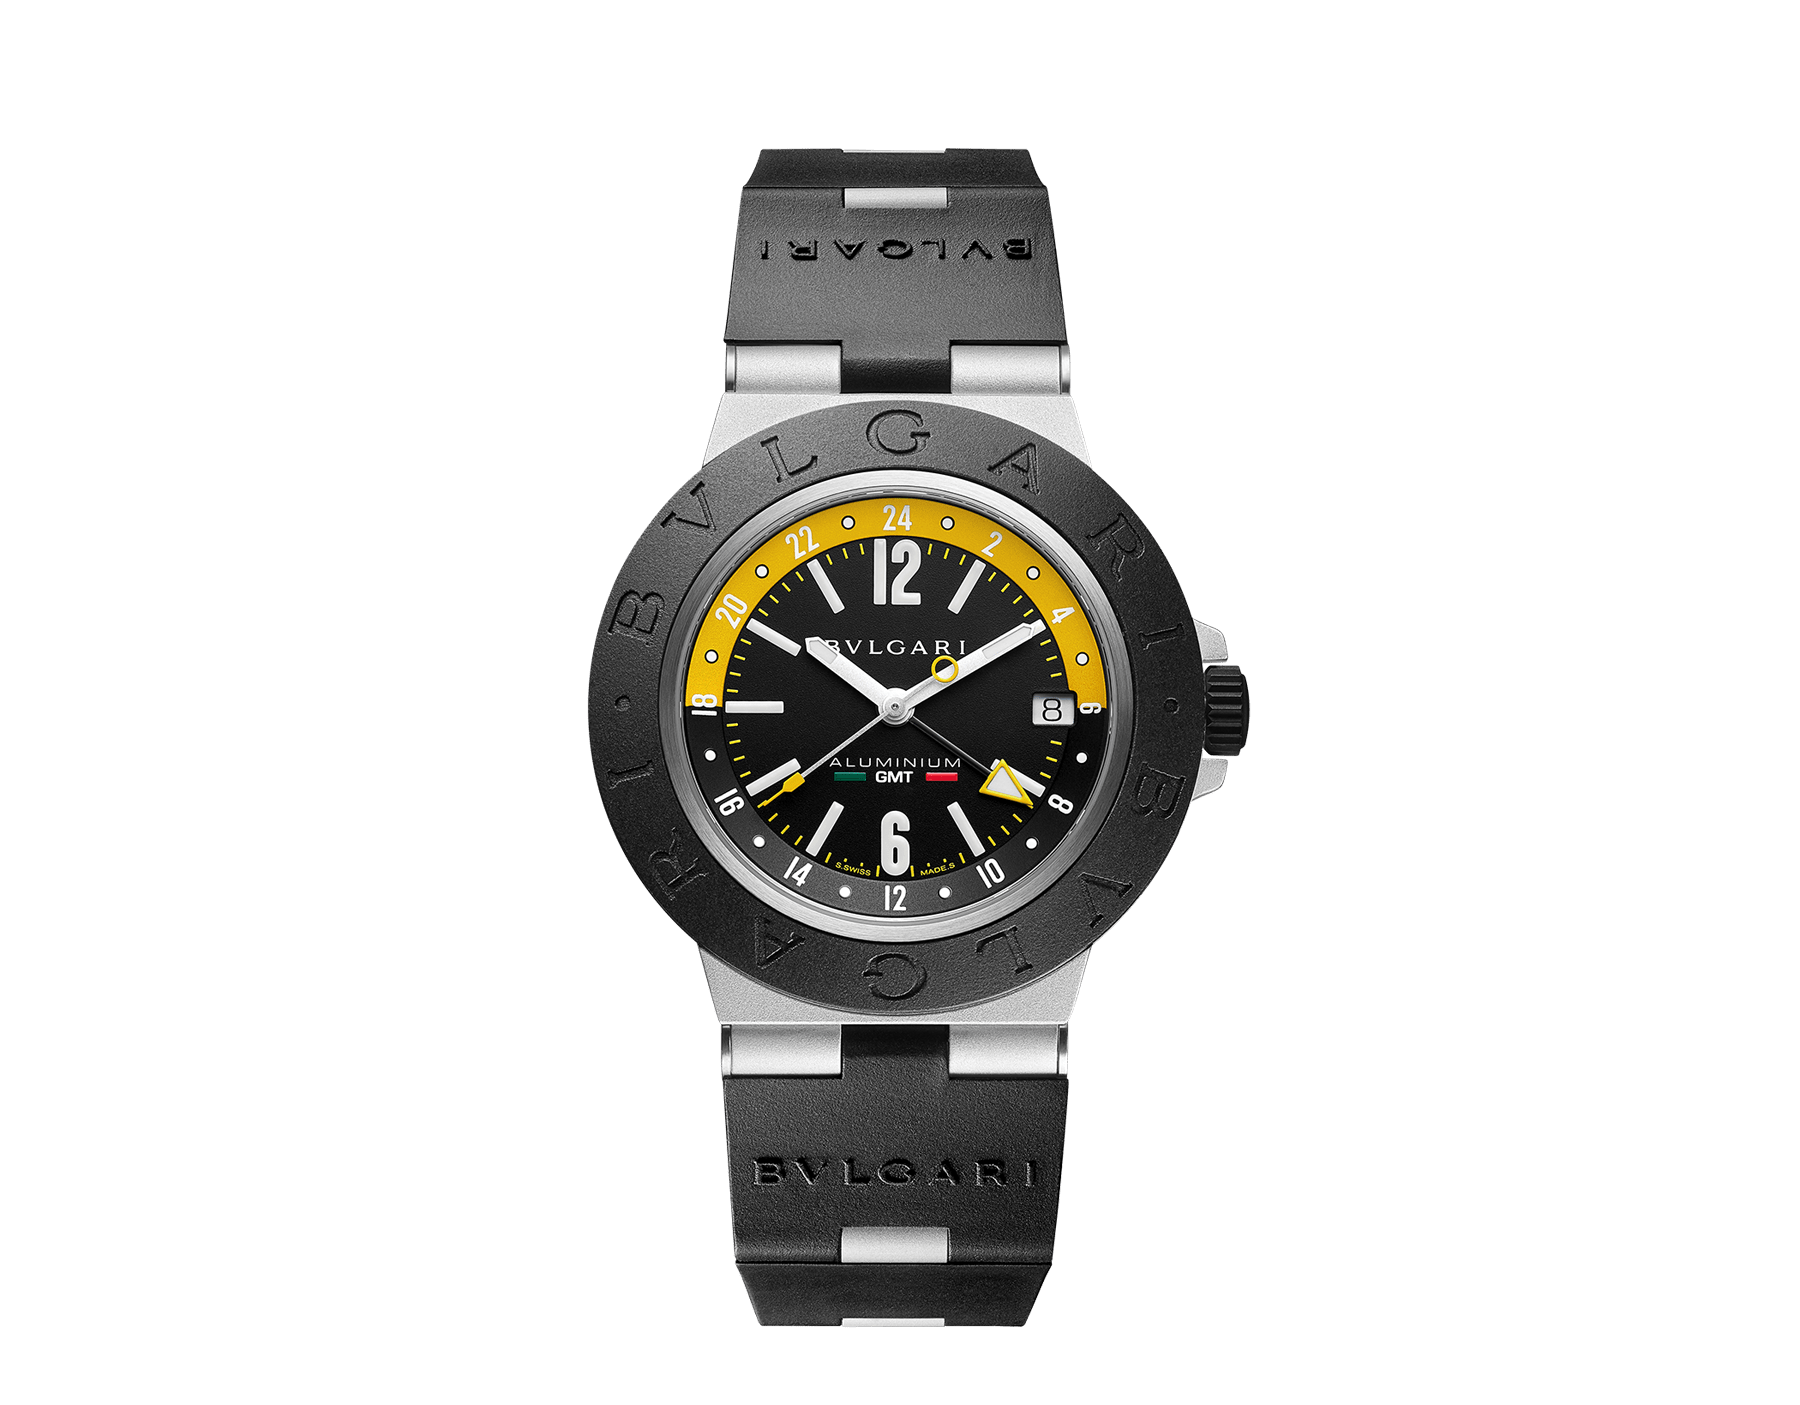 Bulgari Aluminium Amerigo Vespucci Special Edition watch with mechanical manufacture movement, automatic winding, HMSD and GMT, 40 mm aluminum case, black rubber bezel with BVLGARI BVLGARI engraving, yellow and black inner dial with GMT indications and black rubber bracelet. Water-resistant up to 100 meters. Special Edition of 1,000 pieces. 103702 image 1